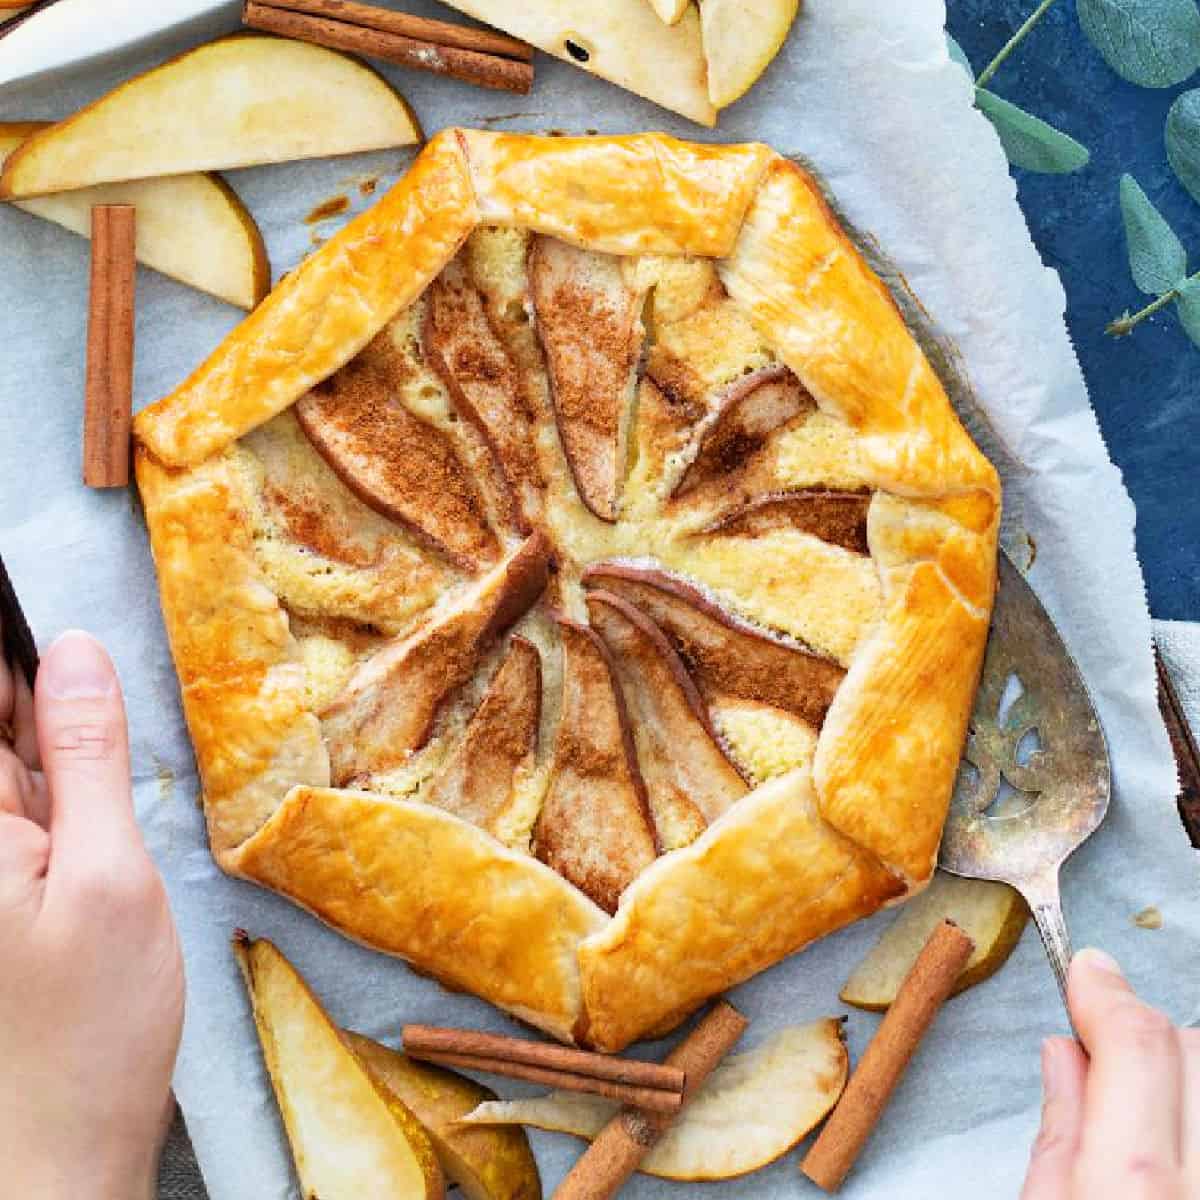 Here's a delicious pear galette flavored with almonds. The flaky crust is filled with creamy almond paste and topped with pear. It's so tasty!
